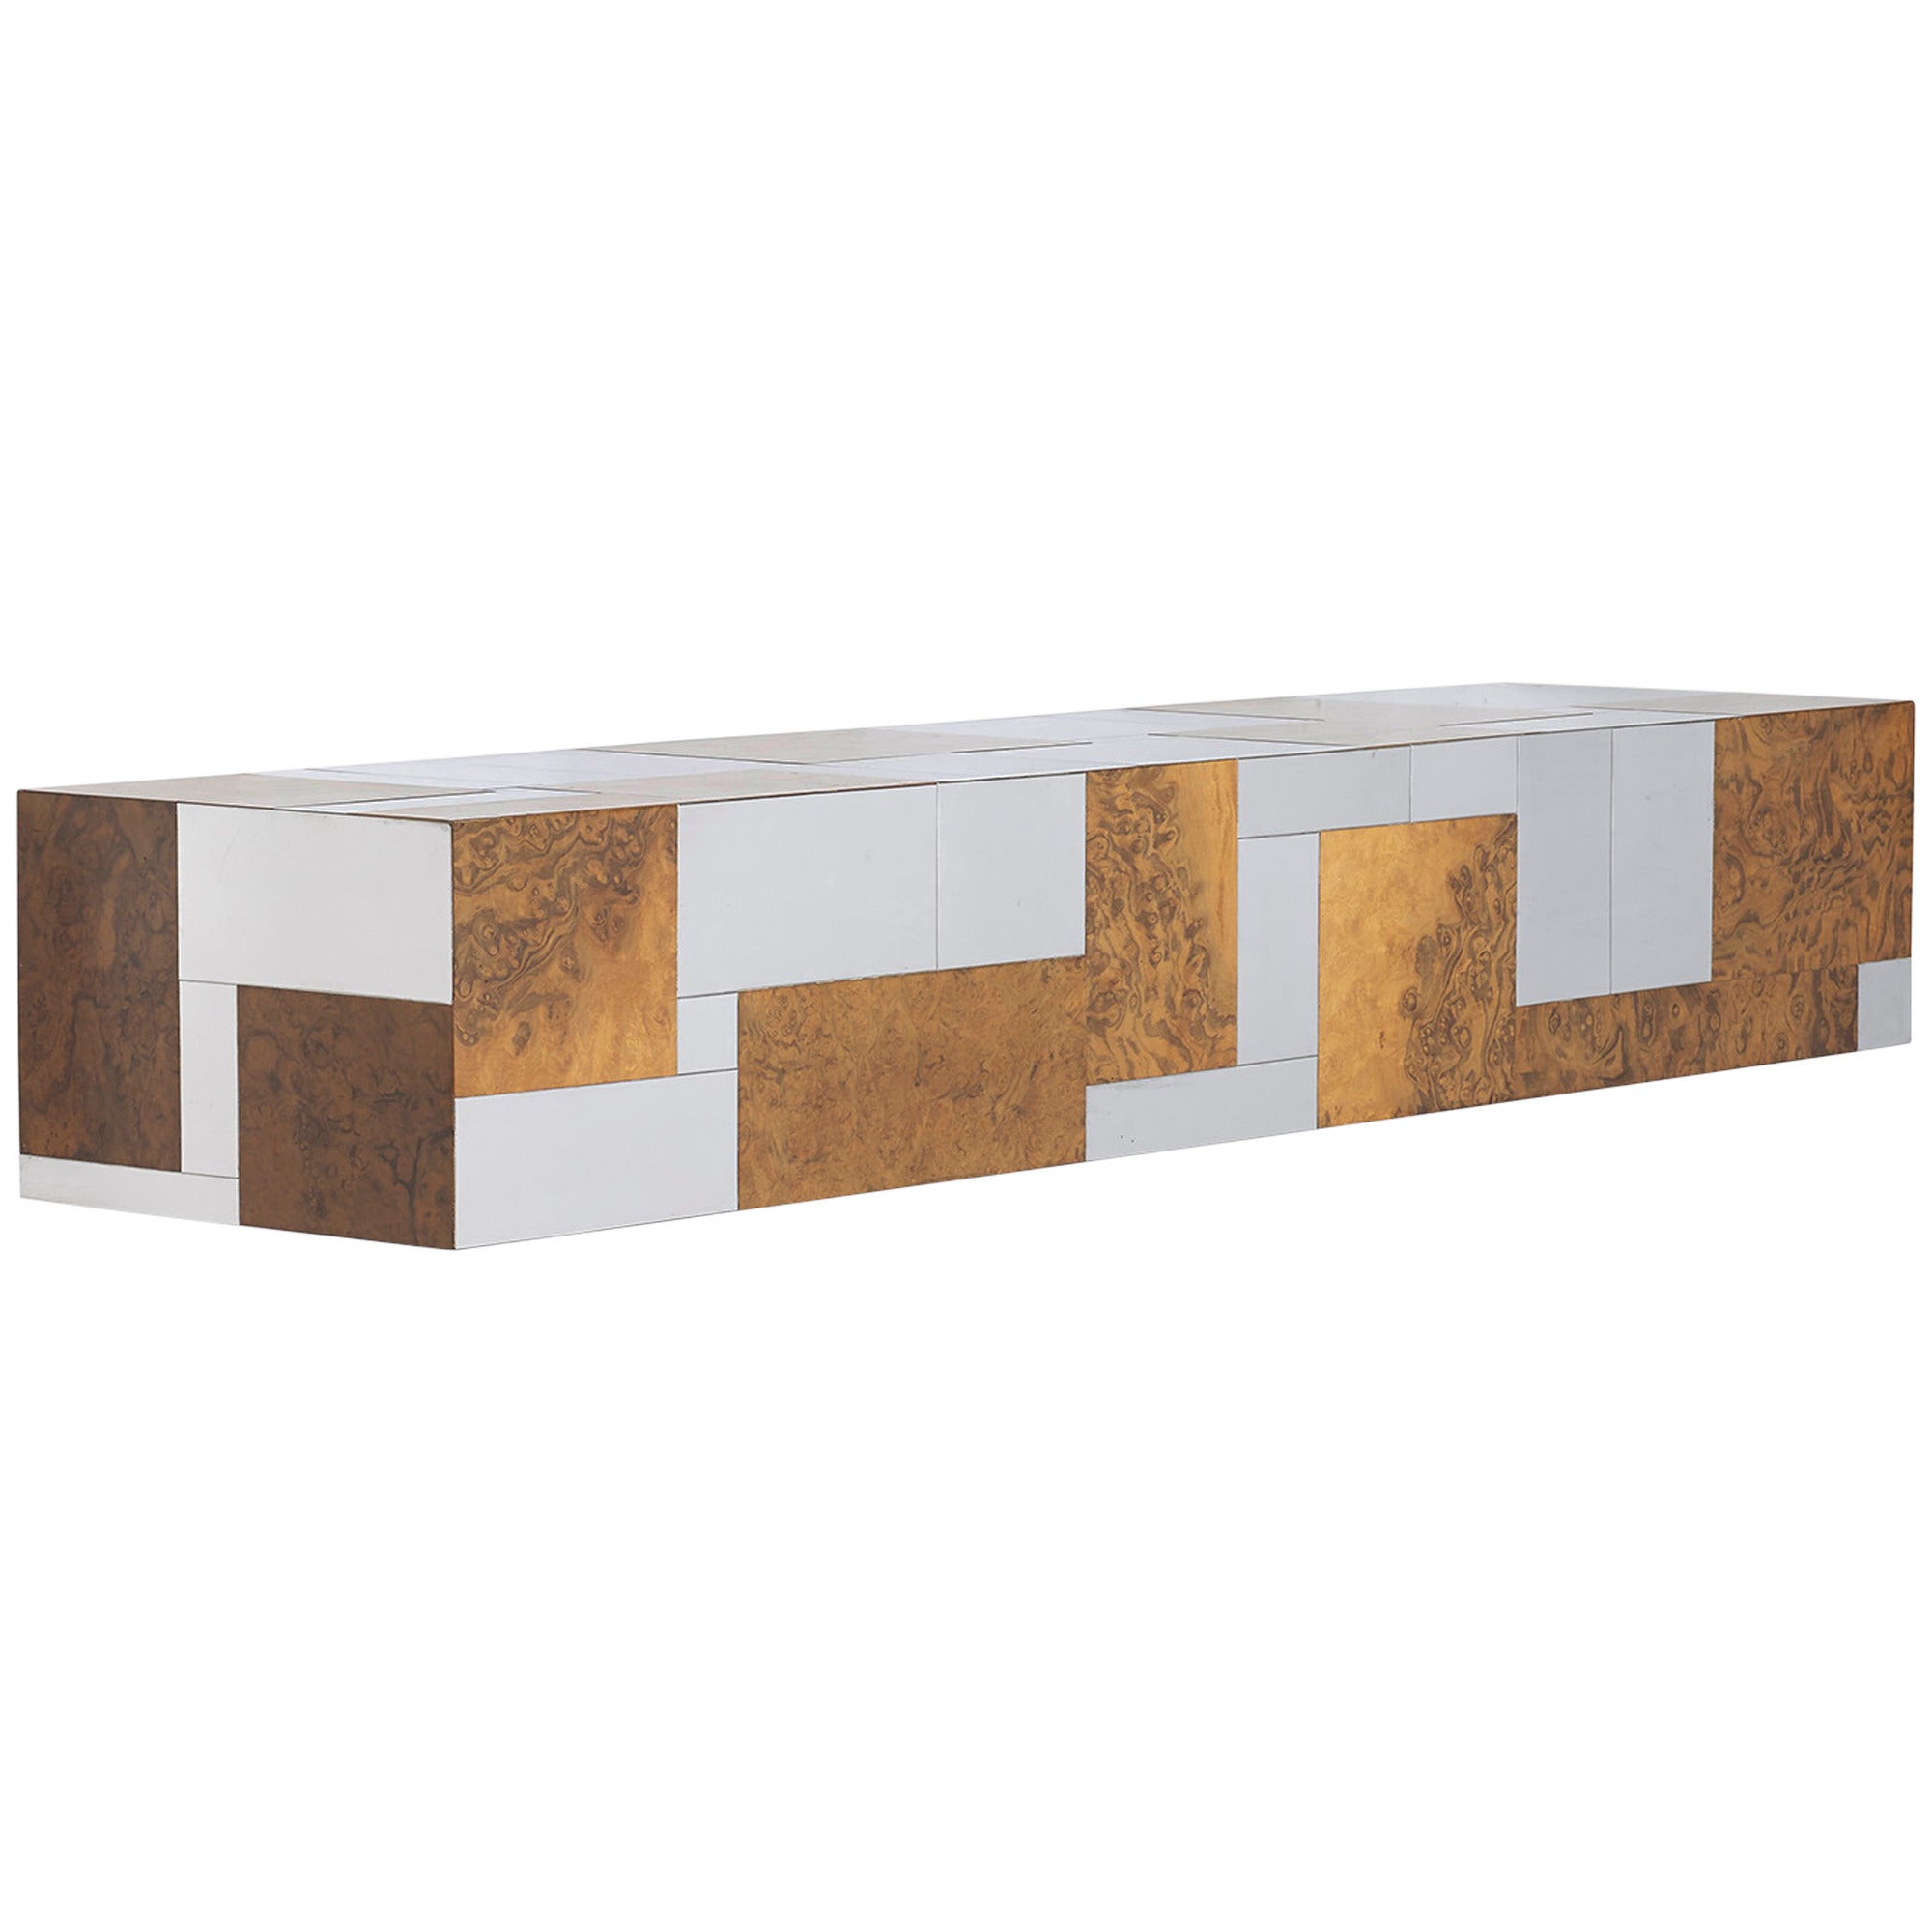 wall-mounted Cityscape console by Paul Evans for Directional